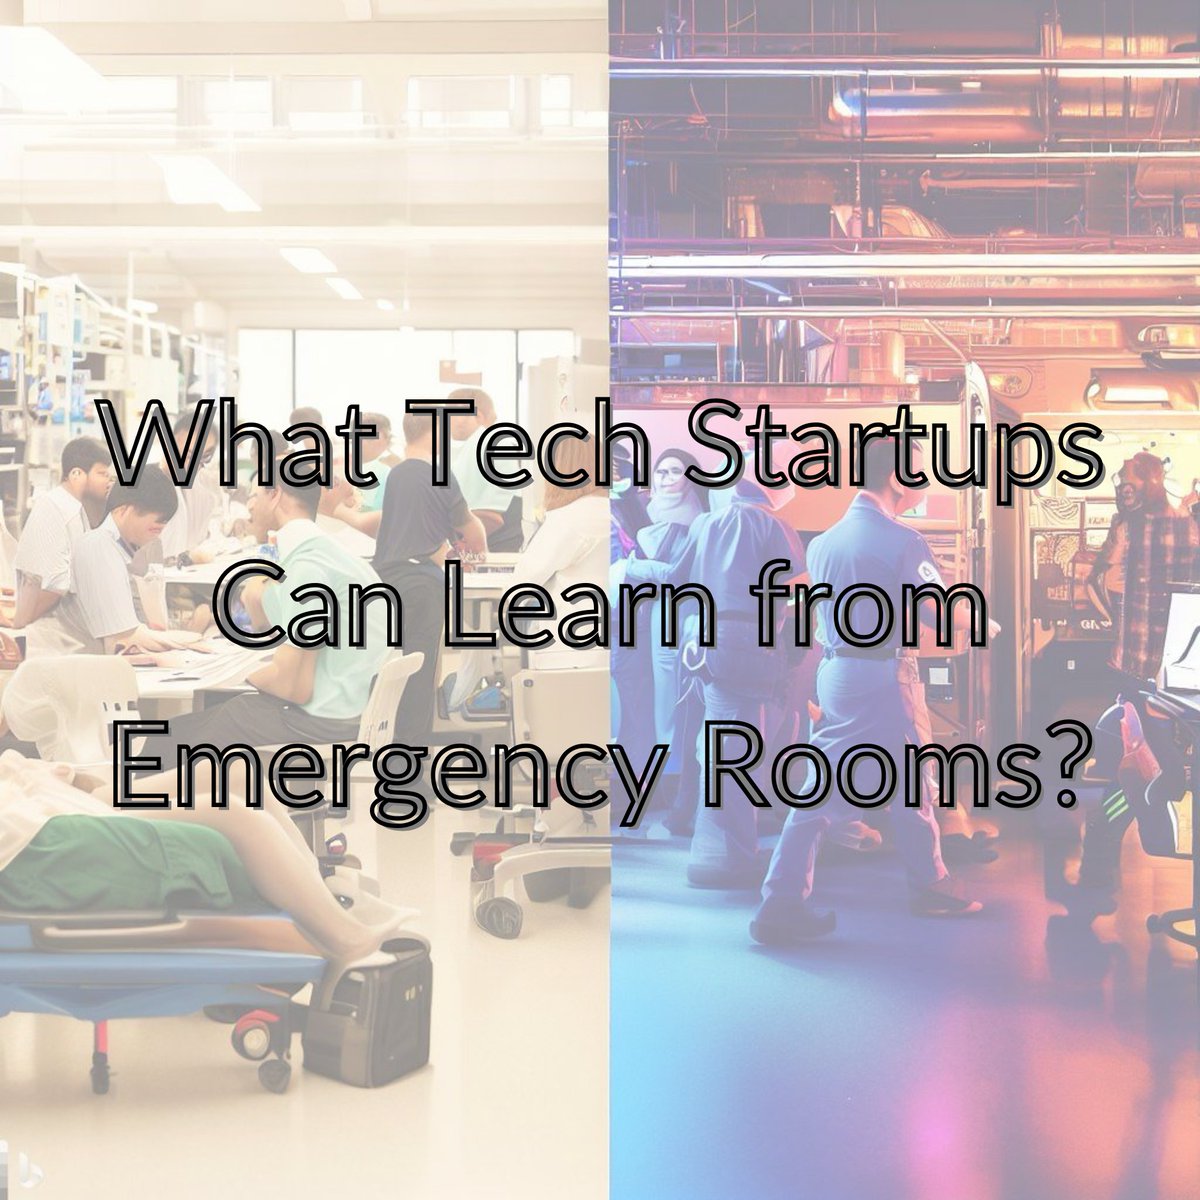 Ever considered what a tech startup could learn from an Emergency Room? Triage, cooperation, adaptability, and clear communication are key in both scenarios. We can find #startup inspiration in unexpected places! #Technology #BusinessLessons #Innovation